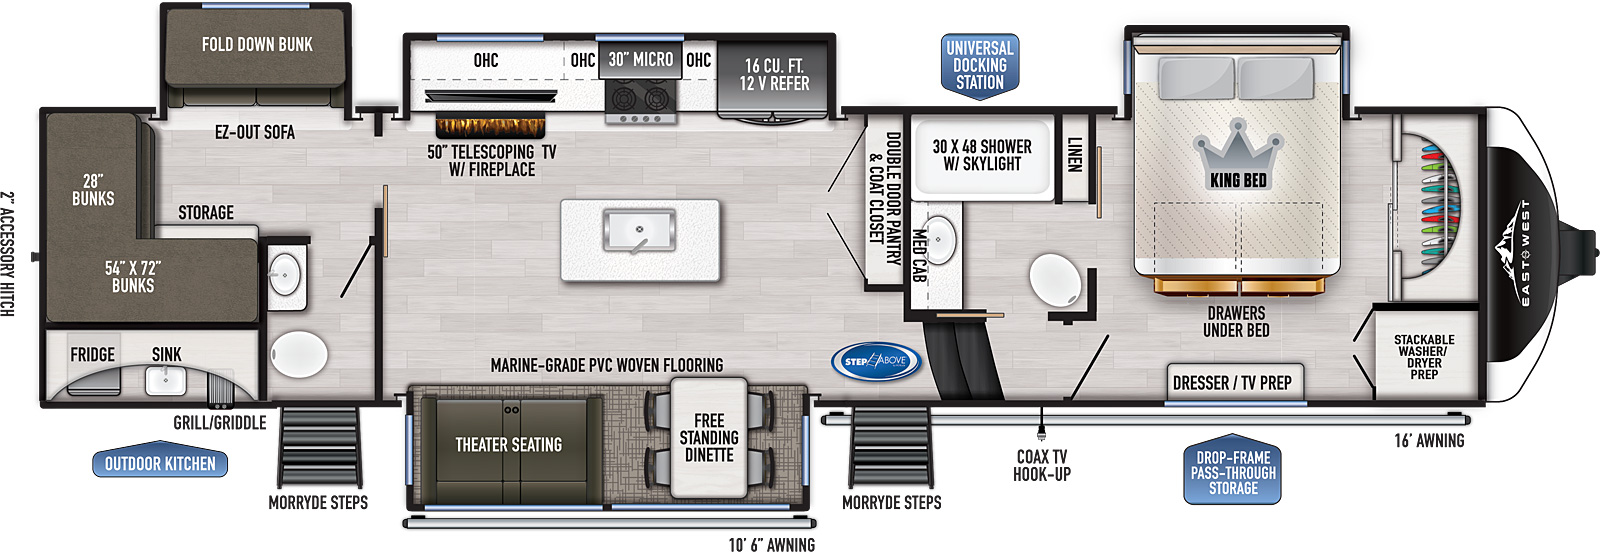 The 378 BH-OK has 4 slide outs, three on the off door side and one on the door side along with one entry door. Interior layout from front to back: front bedroom with front closet and off door side slide-out with king bed and underbed storage; side aisle bathroom with solid pocket doors, shower, medicine cabinet above the sink and a porcelain toilet; kitchen living dining area features a double door pantry and coat closet; kitchen island with deep seated sink; off door side slide-out containing refrigerator, oven, microwave and entertainment center; door side slide-out containing dinette and theater seating across from angled entertainment center; rear bunk room with half bathroom, two bunks on the rear wall and a off door slide-out containing a 60" sofa and 60" wide bunk.